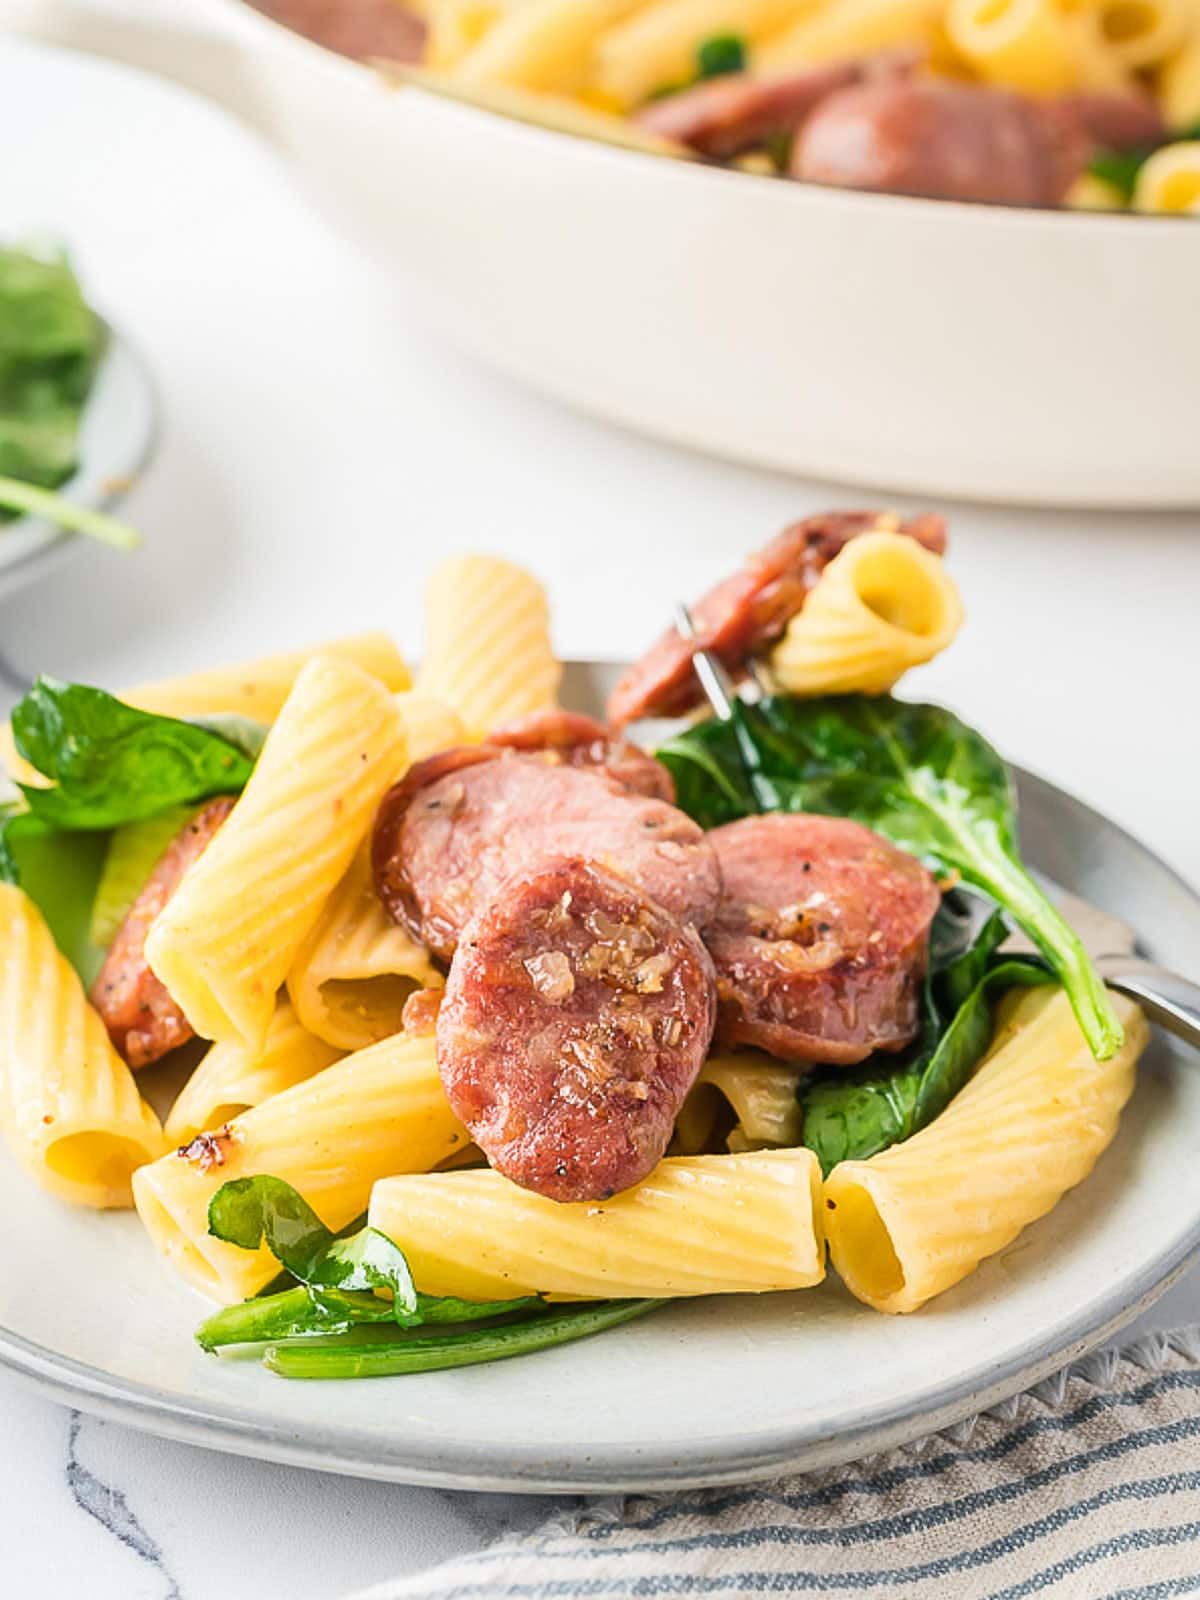 A plate of pasta with sausage and spinach.